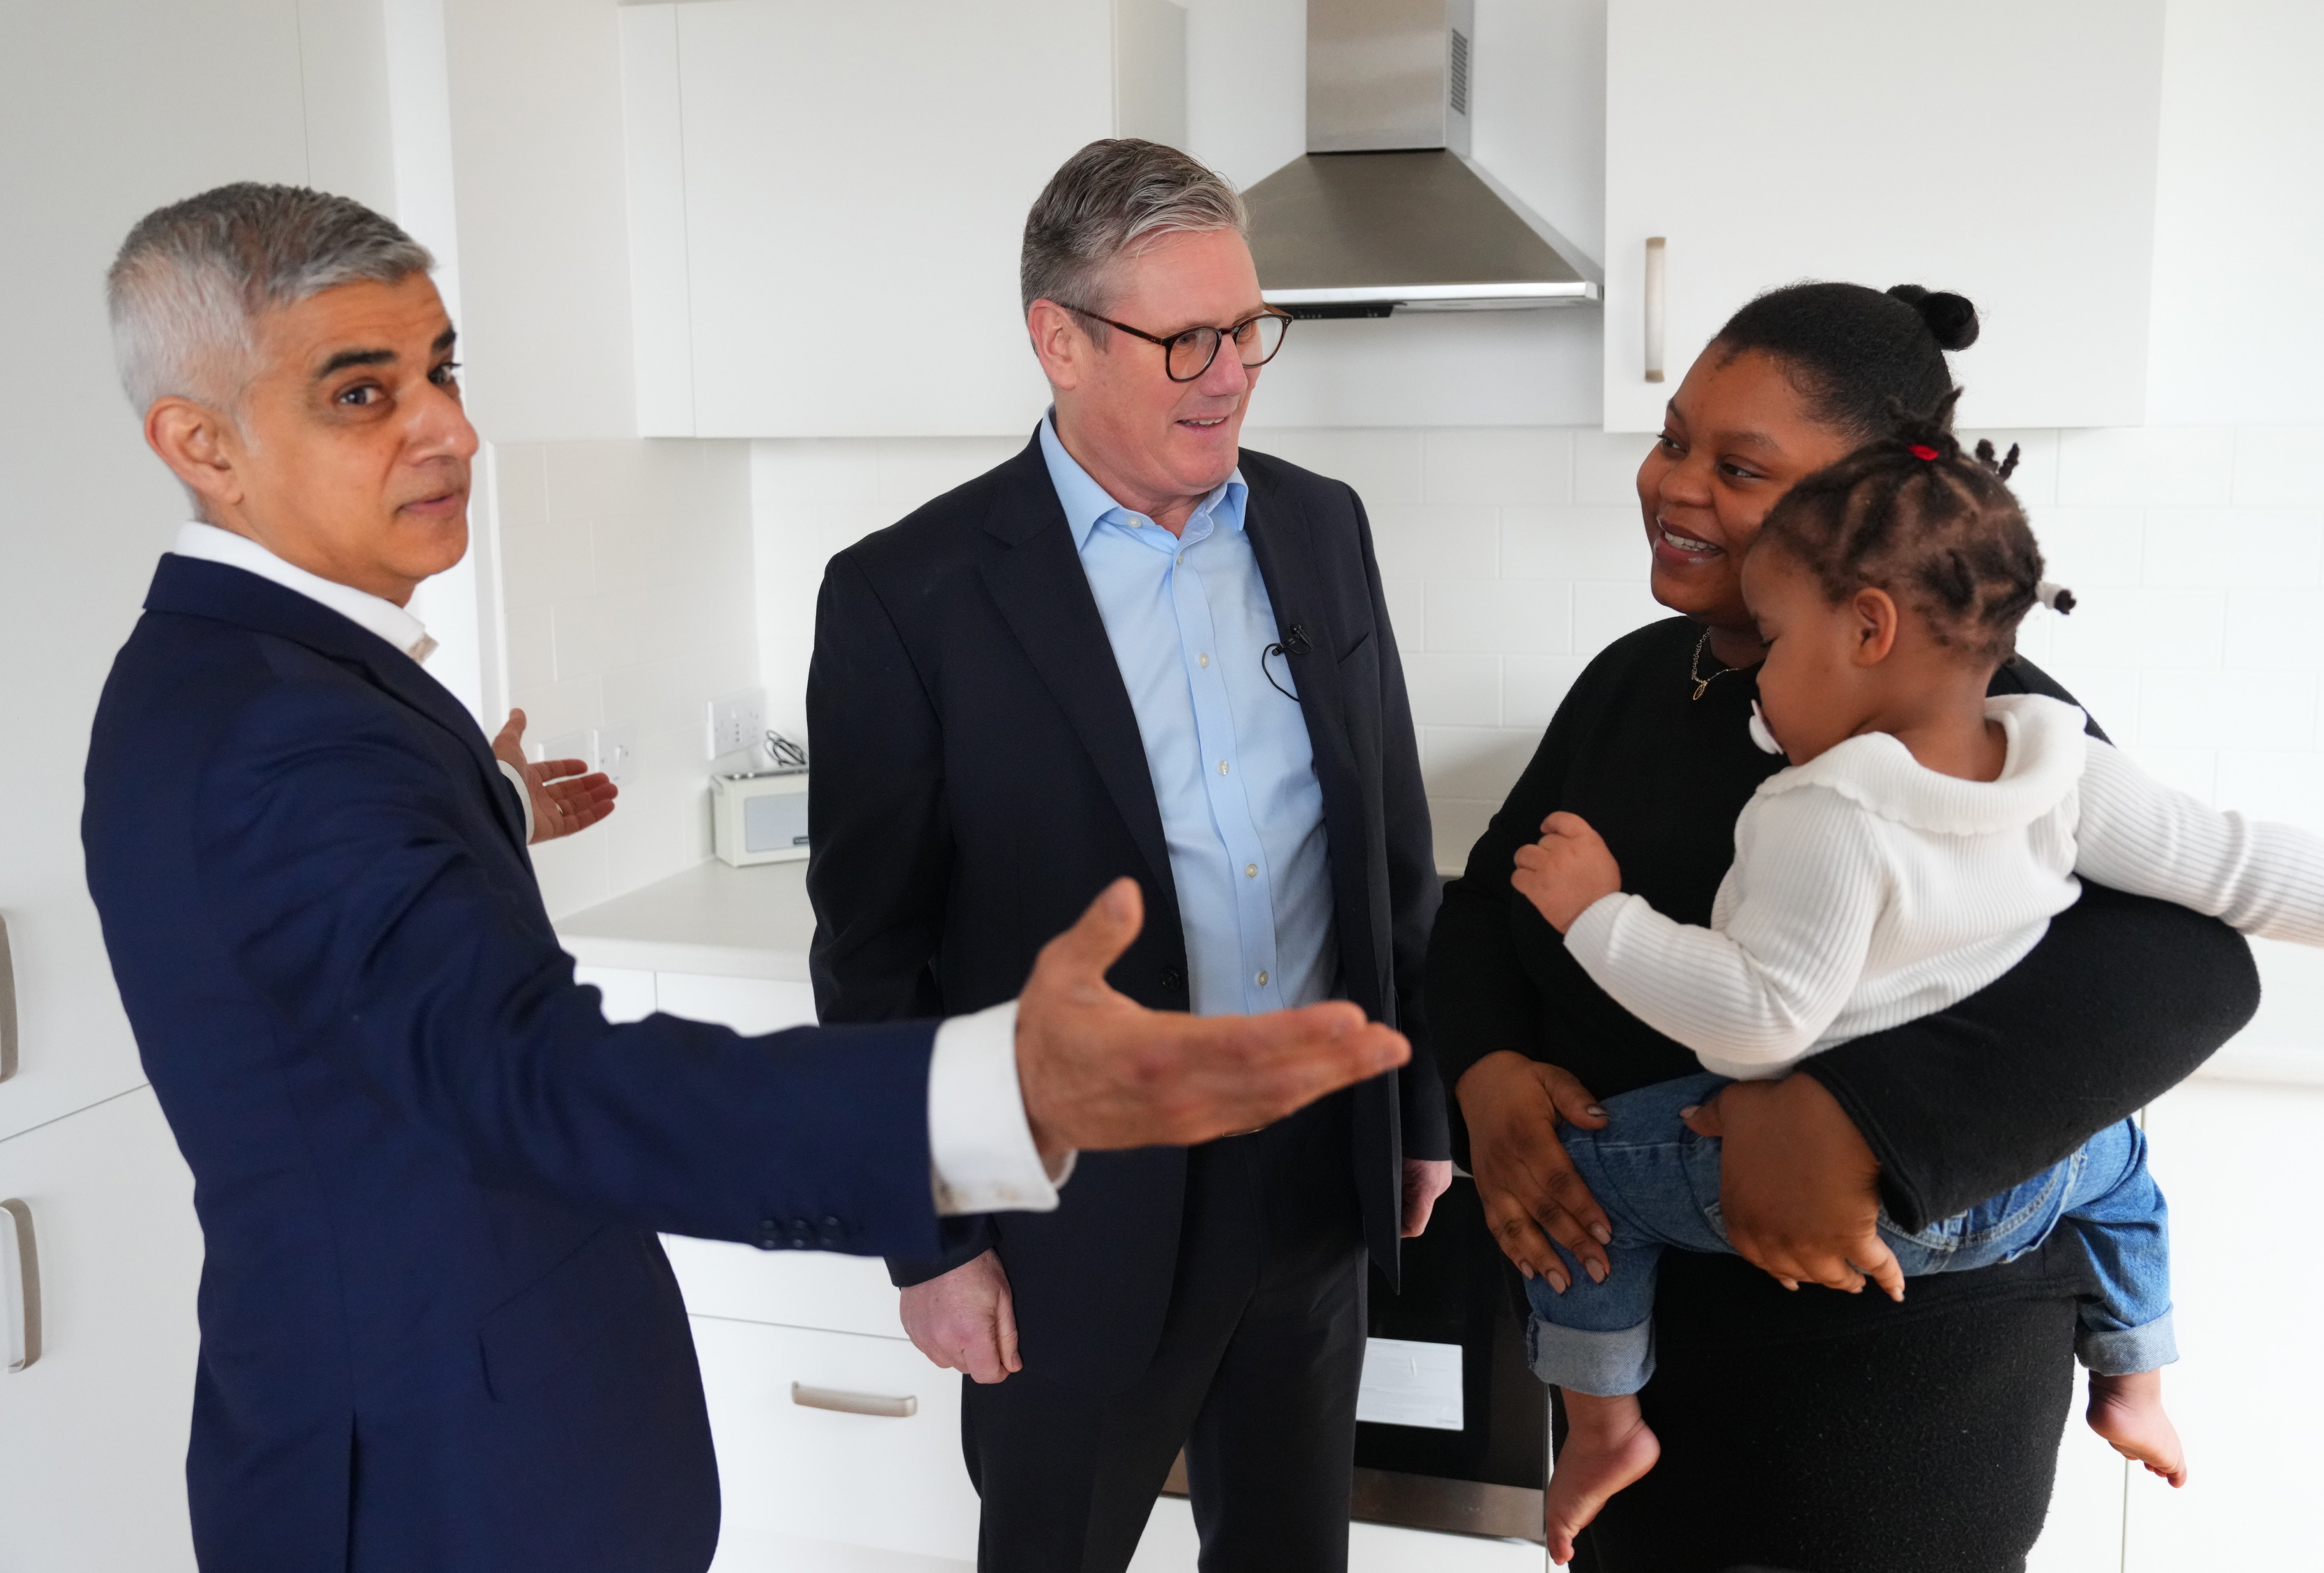 Sadiq Khan and Keir Starmer on a visit to a major new City Hall-funded council housing development after launching his re-election campaign